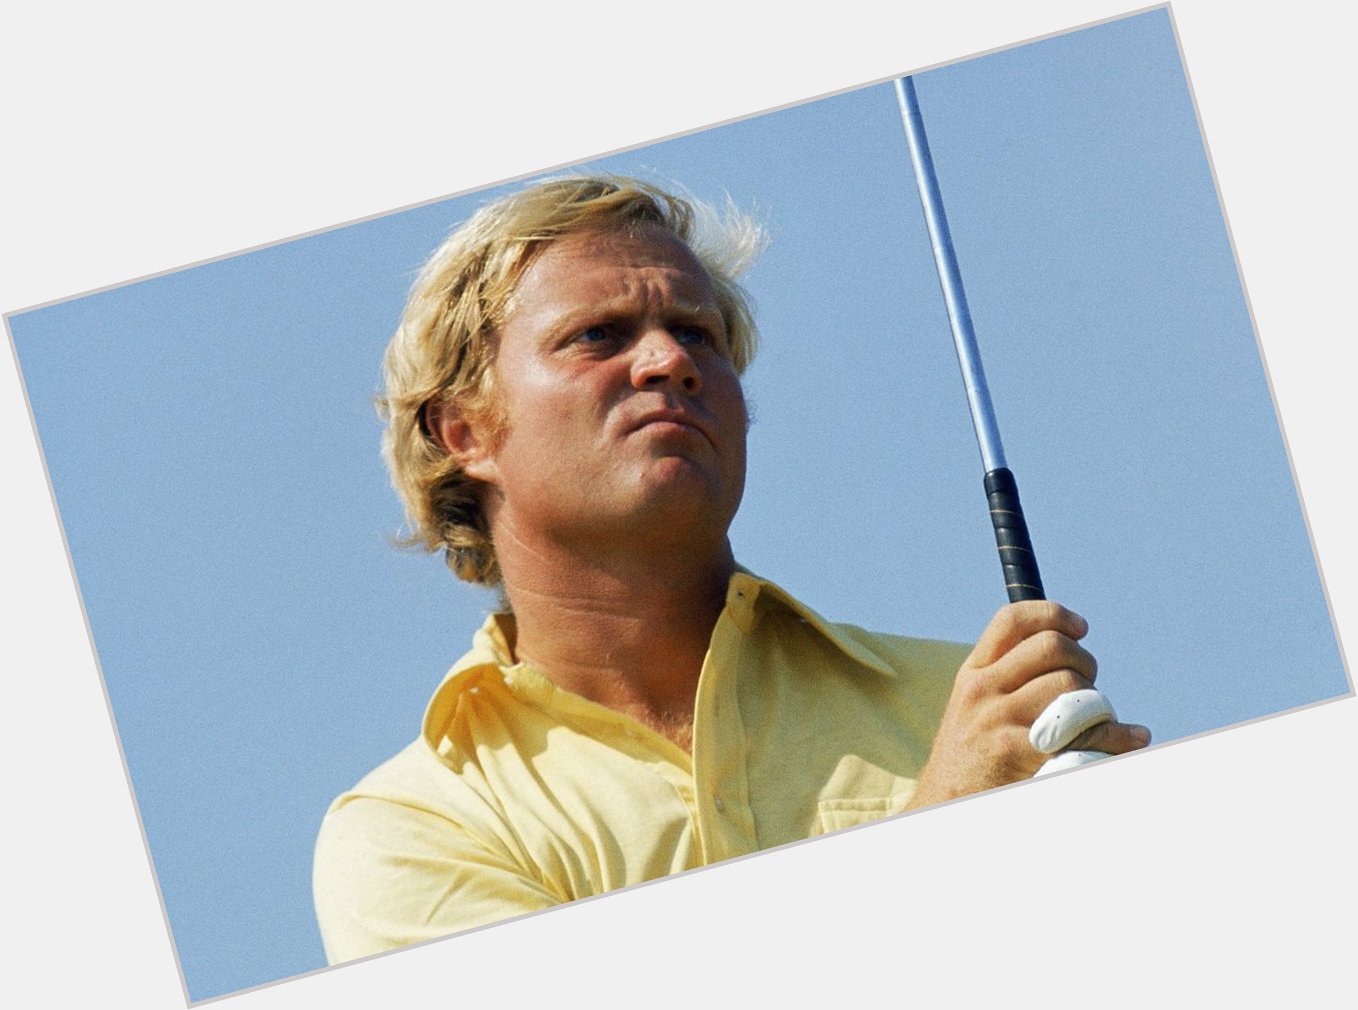 Happy 77th birthday to Jack Nicklaus.   